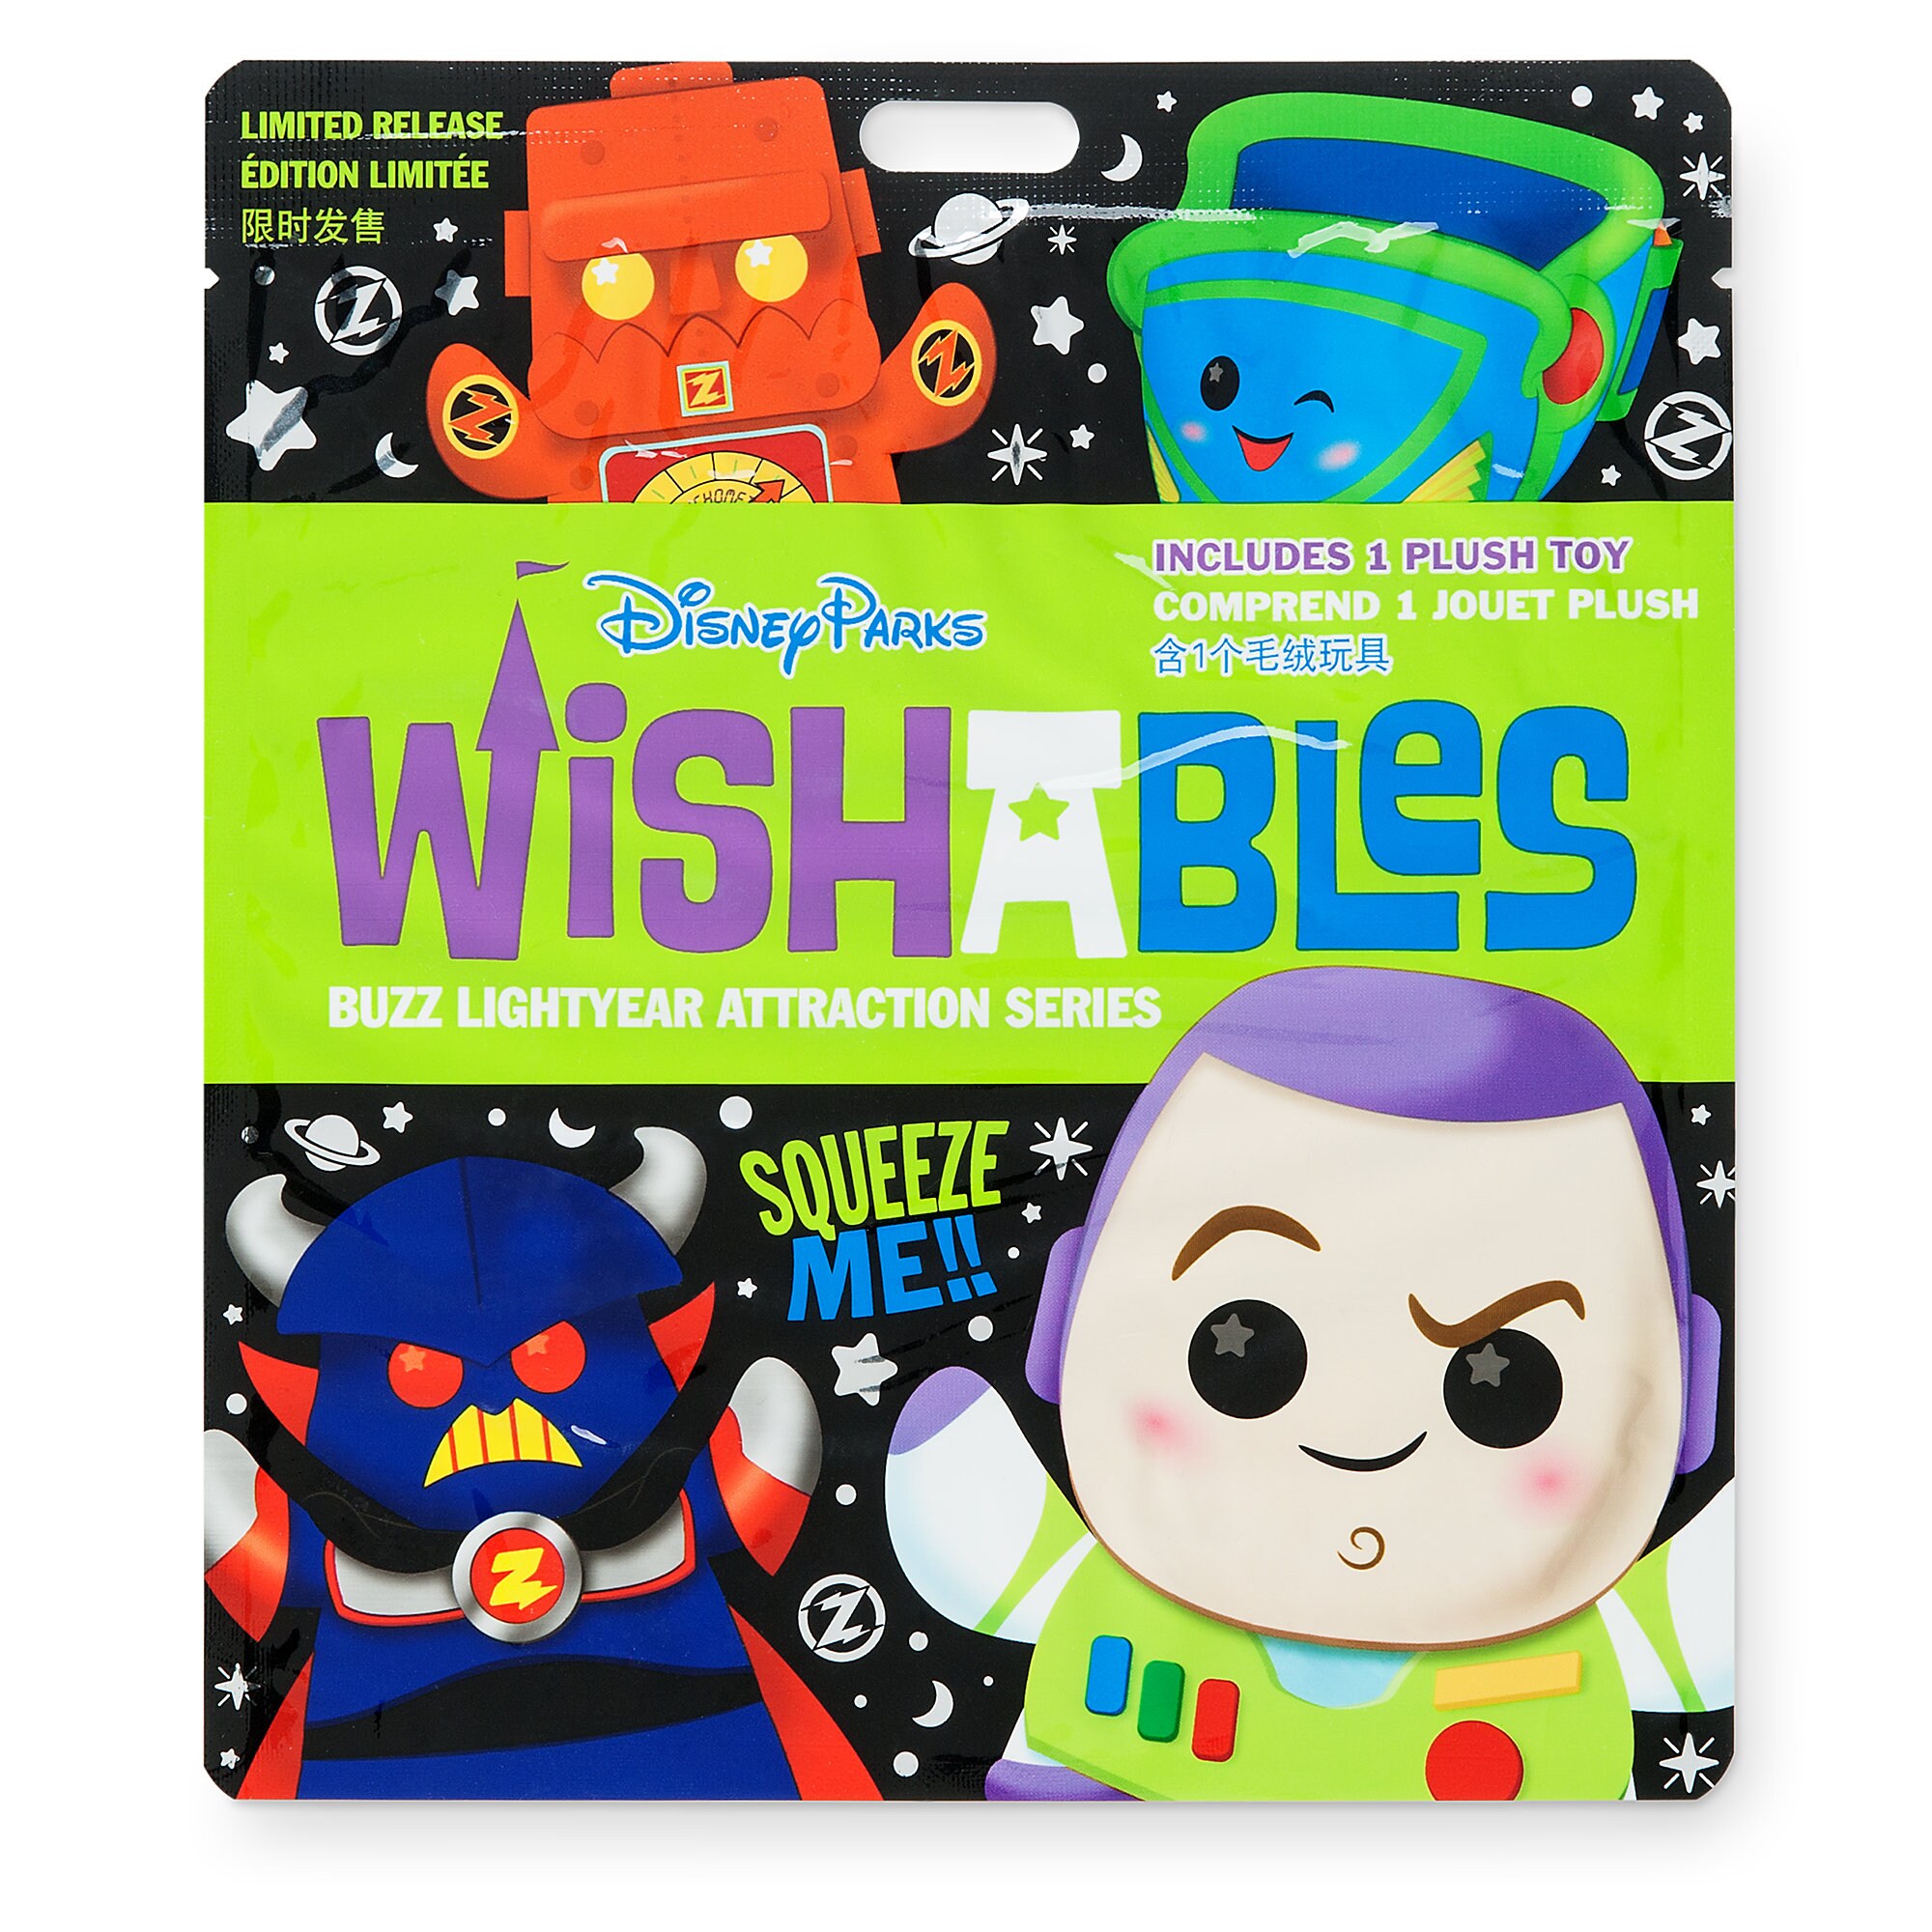 Disney Parks Wishables Mystery Plush - Buzz Lightyear Attraction Series